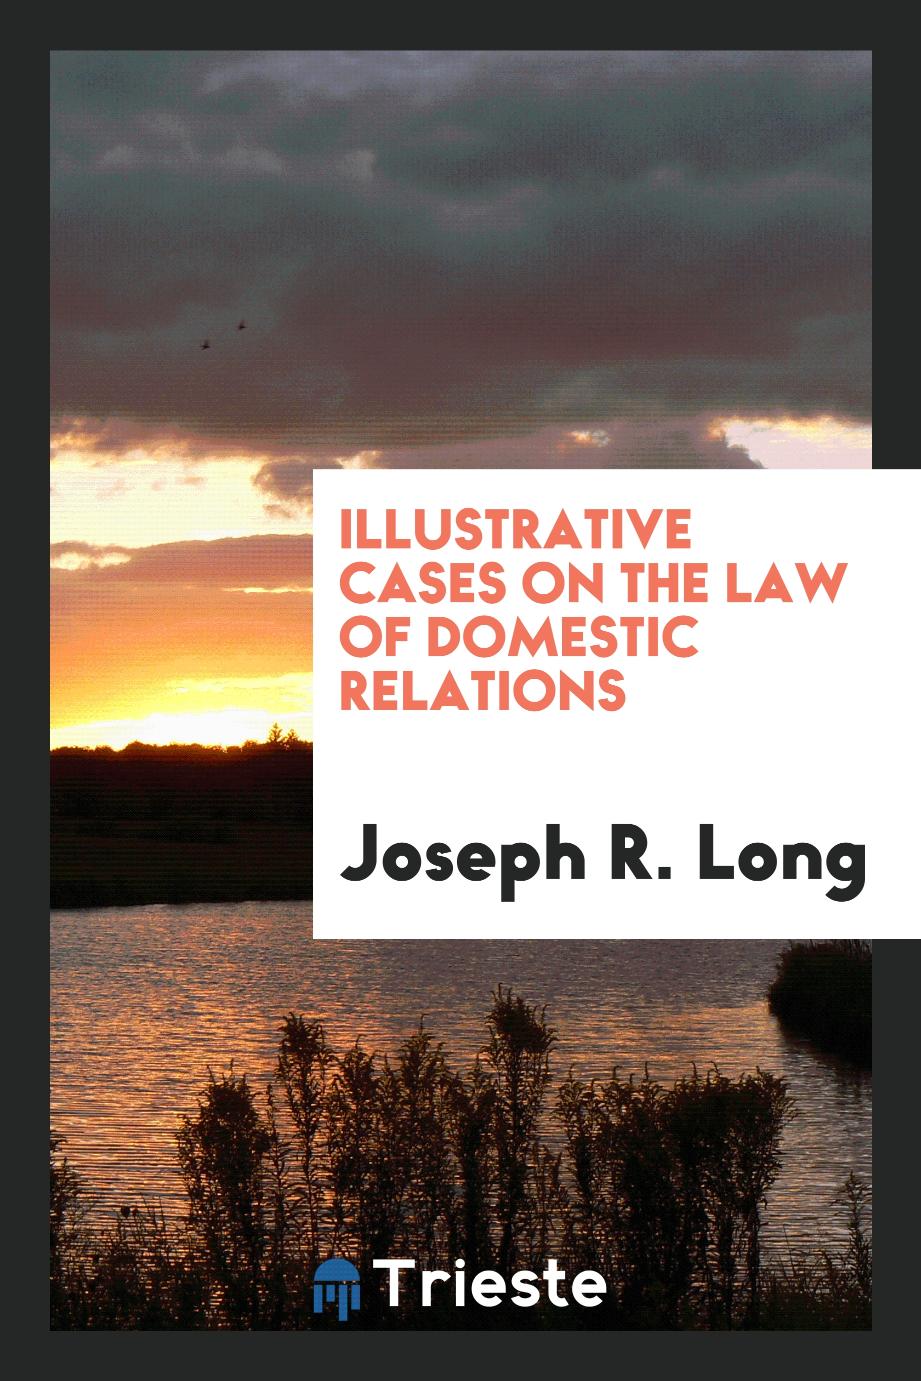 Illustrative cases on the law of domestic relations